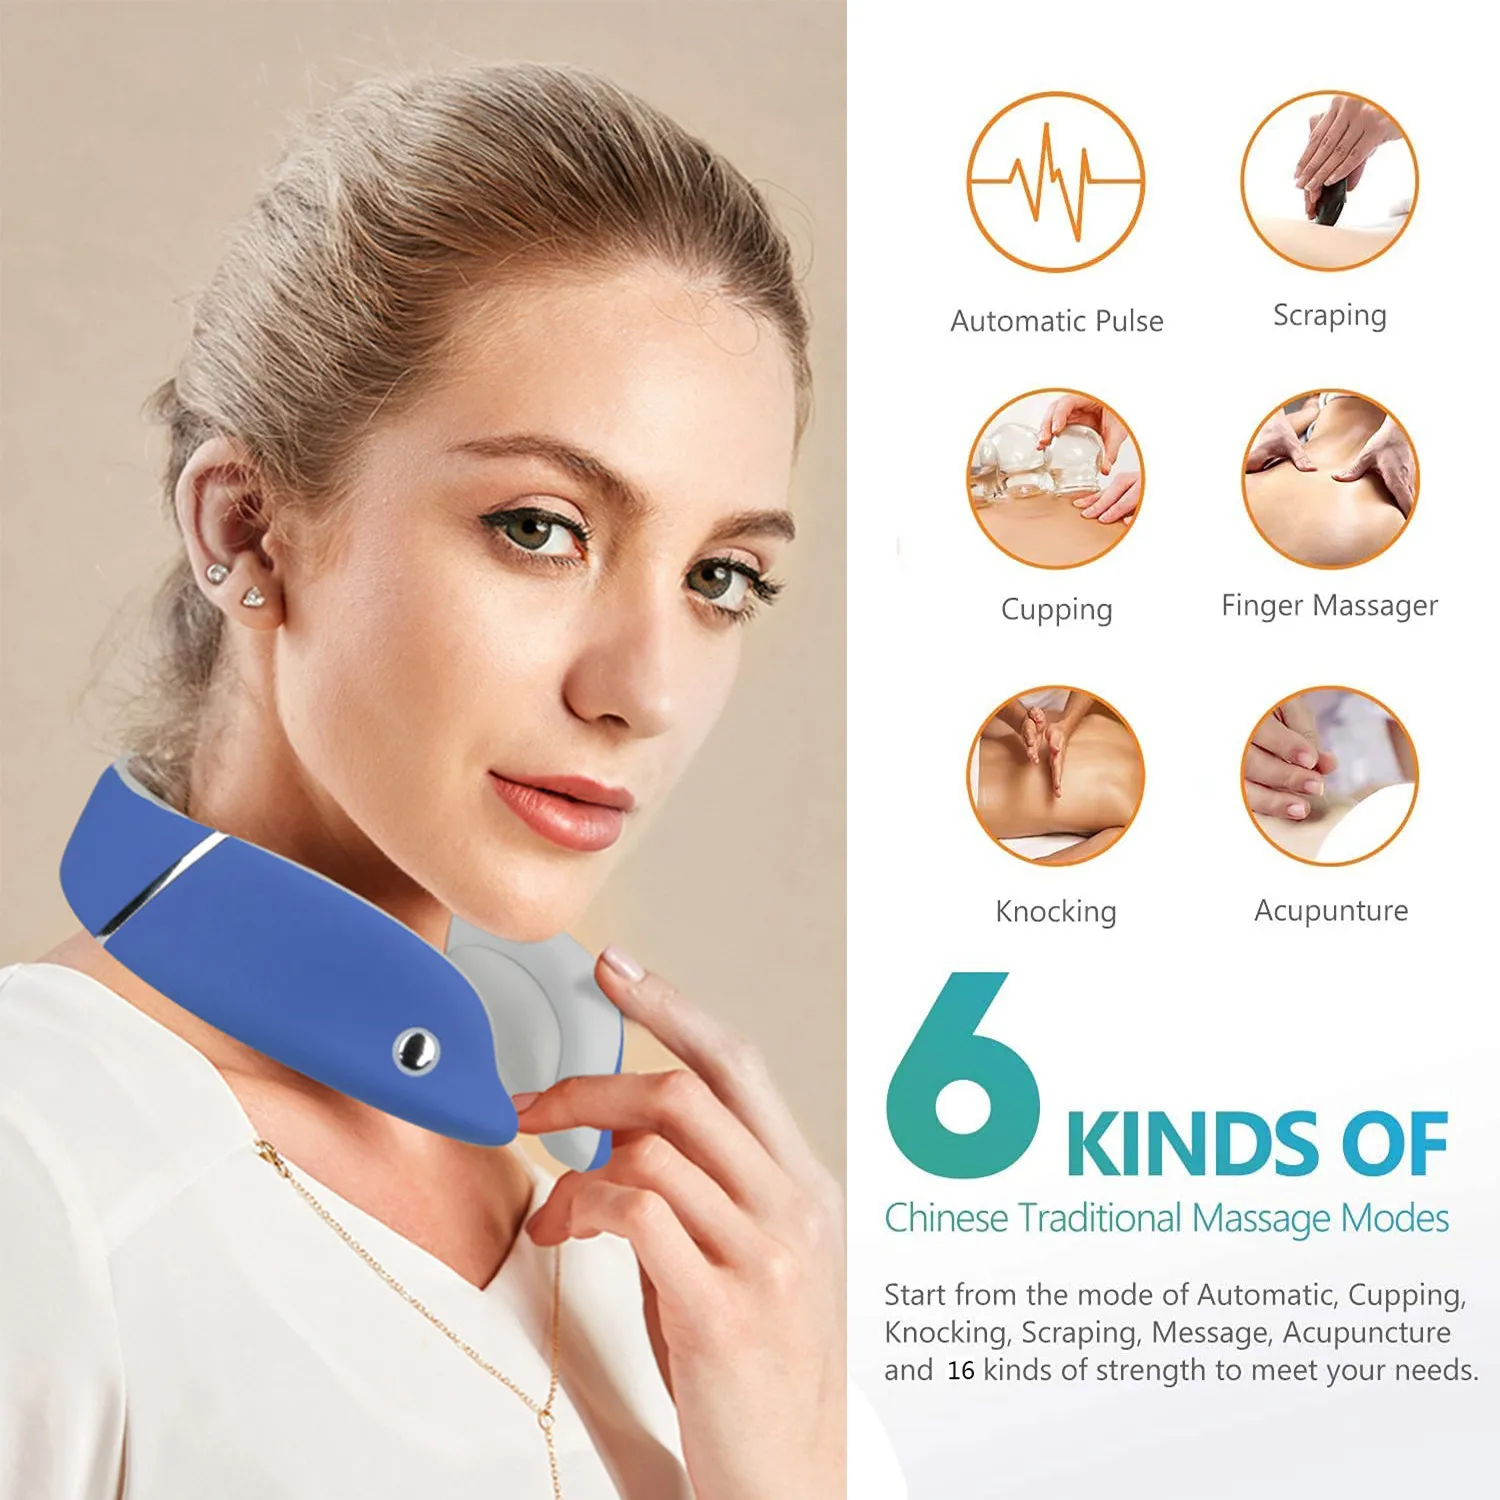 https://ae01.alicdn.com/kf/H024ae7aeecdd4c669aecce9f88a2ef04O/Electric-Pulse-Neck-Massager-with-Heat-Cordless-Deep-Tissue-Trigger-Point-Massager-Relaxation-Cervical-Vertebra-Physiotherapy.jpg